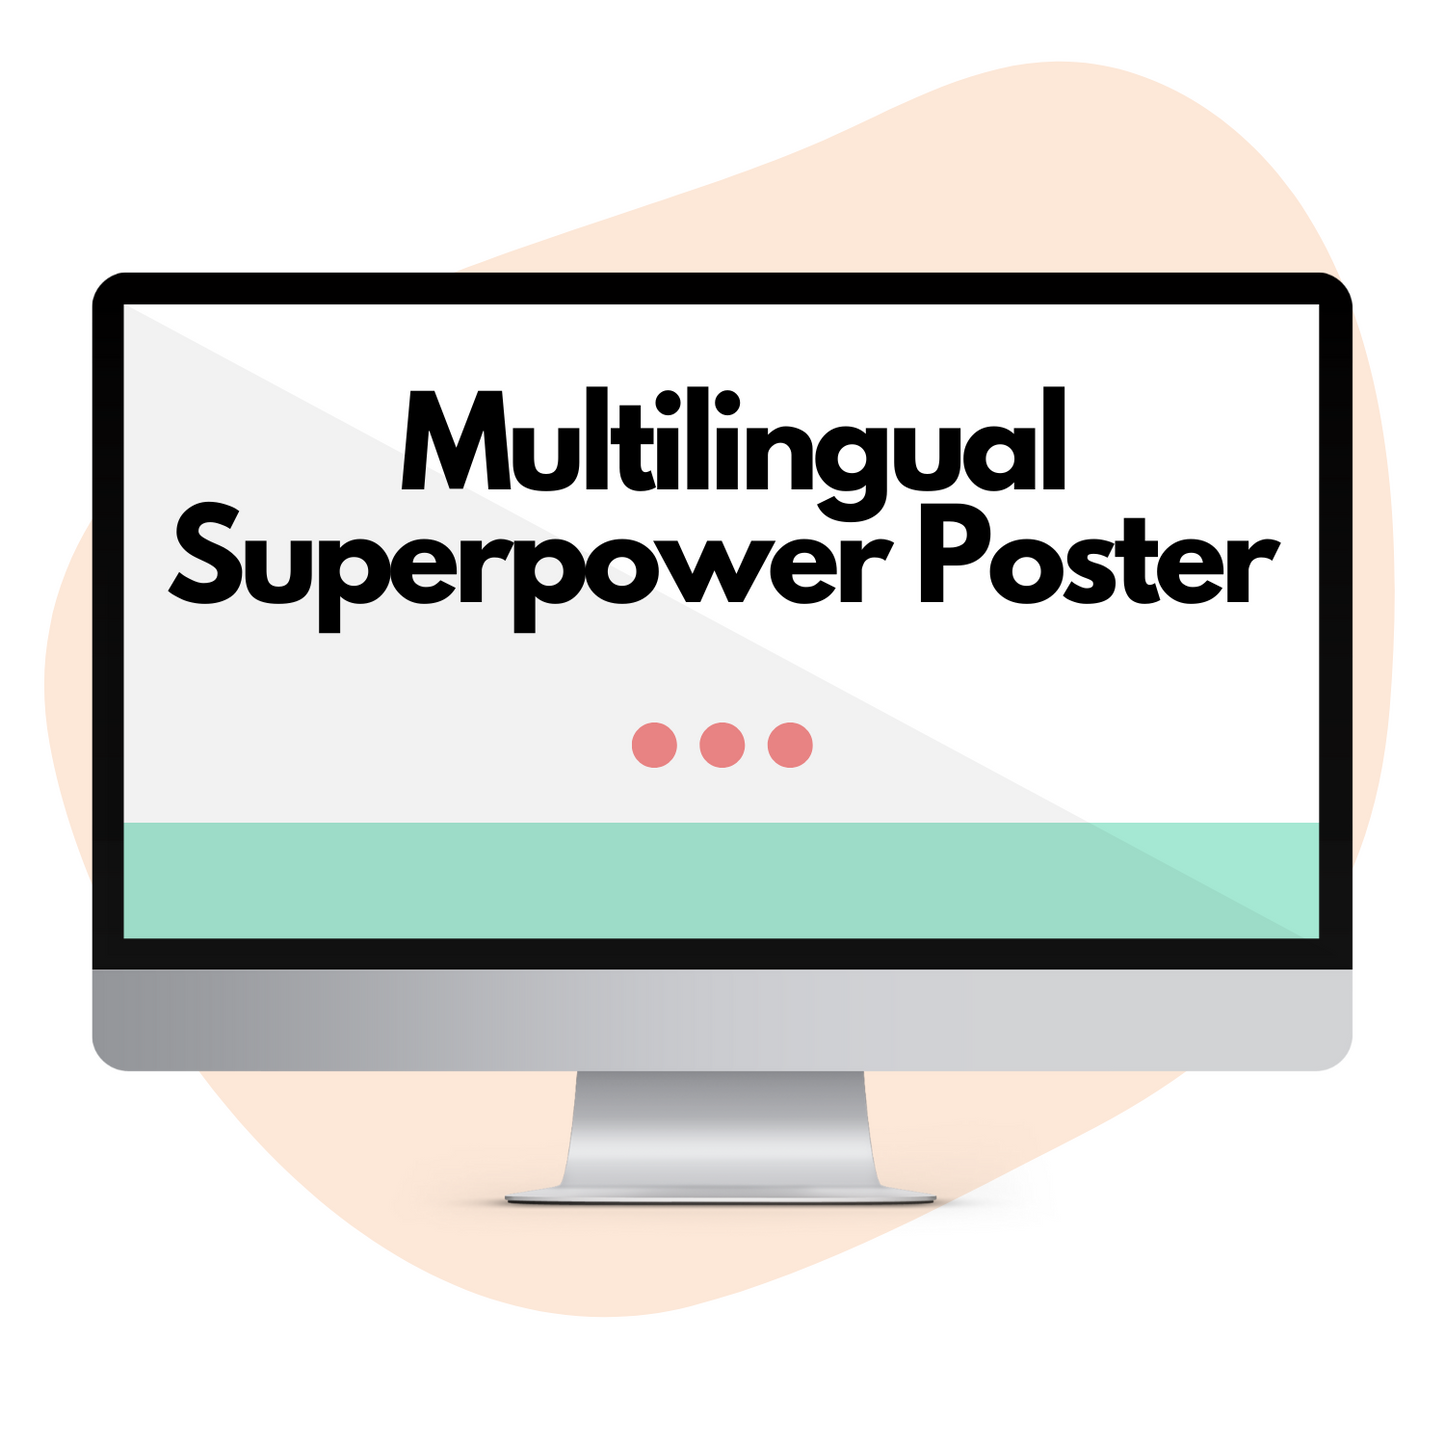 Being Multilingual Is my Superpower Poster (In Spanish)